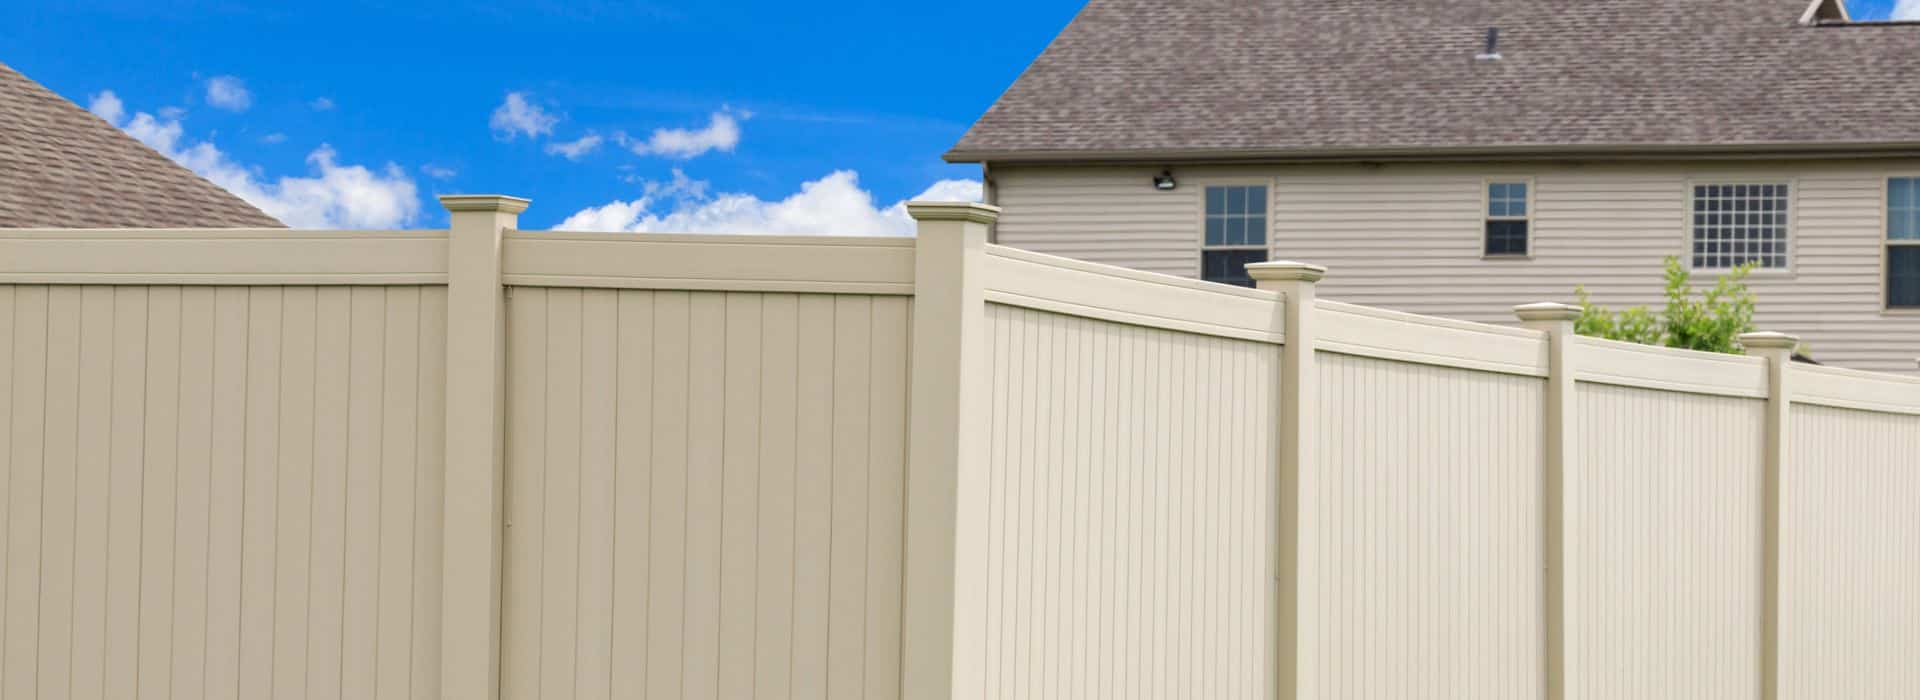 Vinyl Fence & PVC Fence in Fort Lauderdale